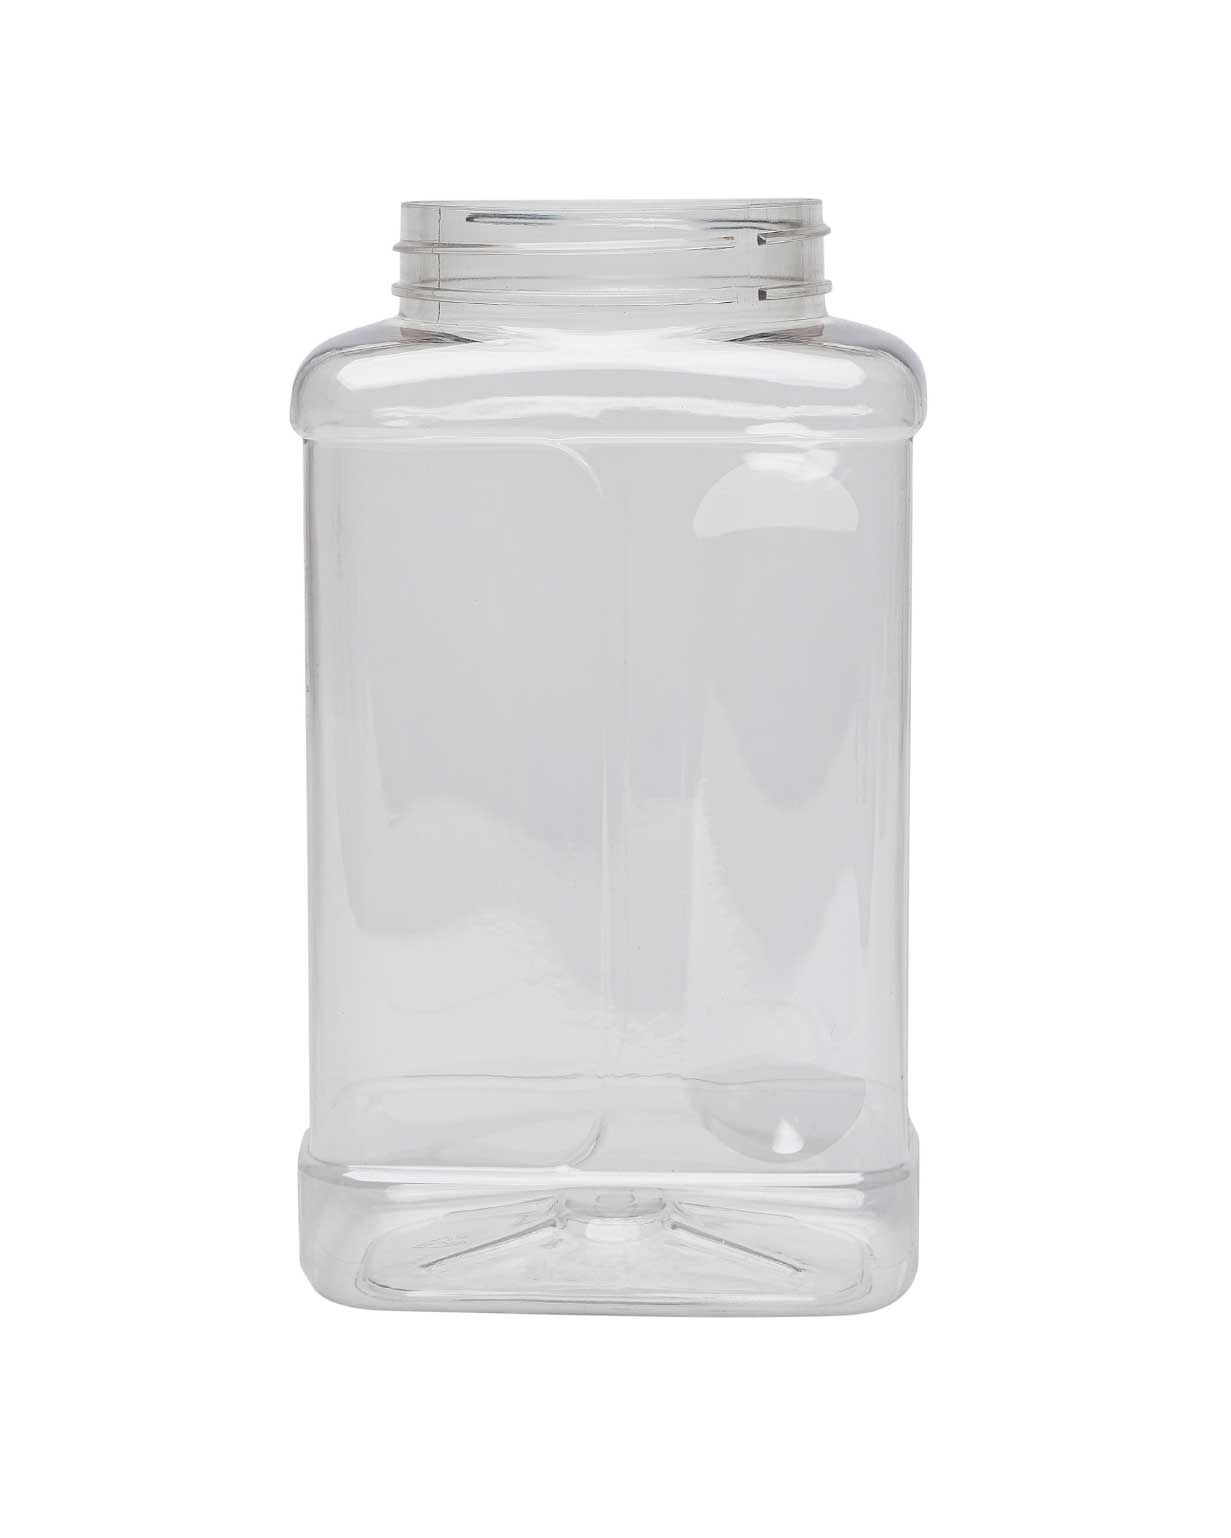 1 GALLON CLEAR PET GRIPPED SQUARE JUG - 110-400 INFO